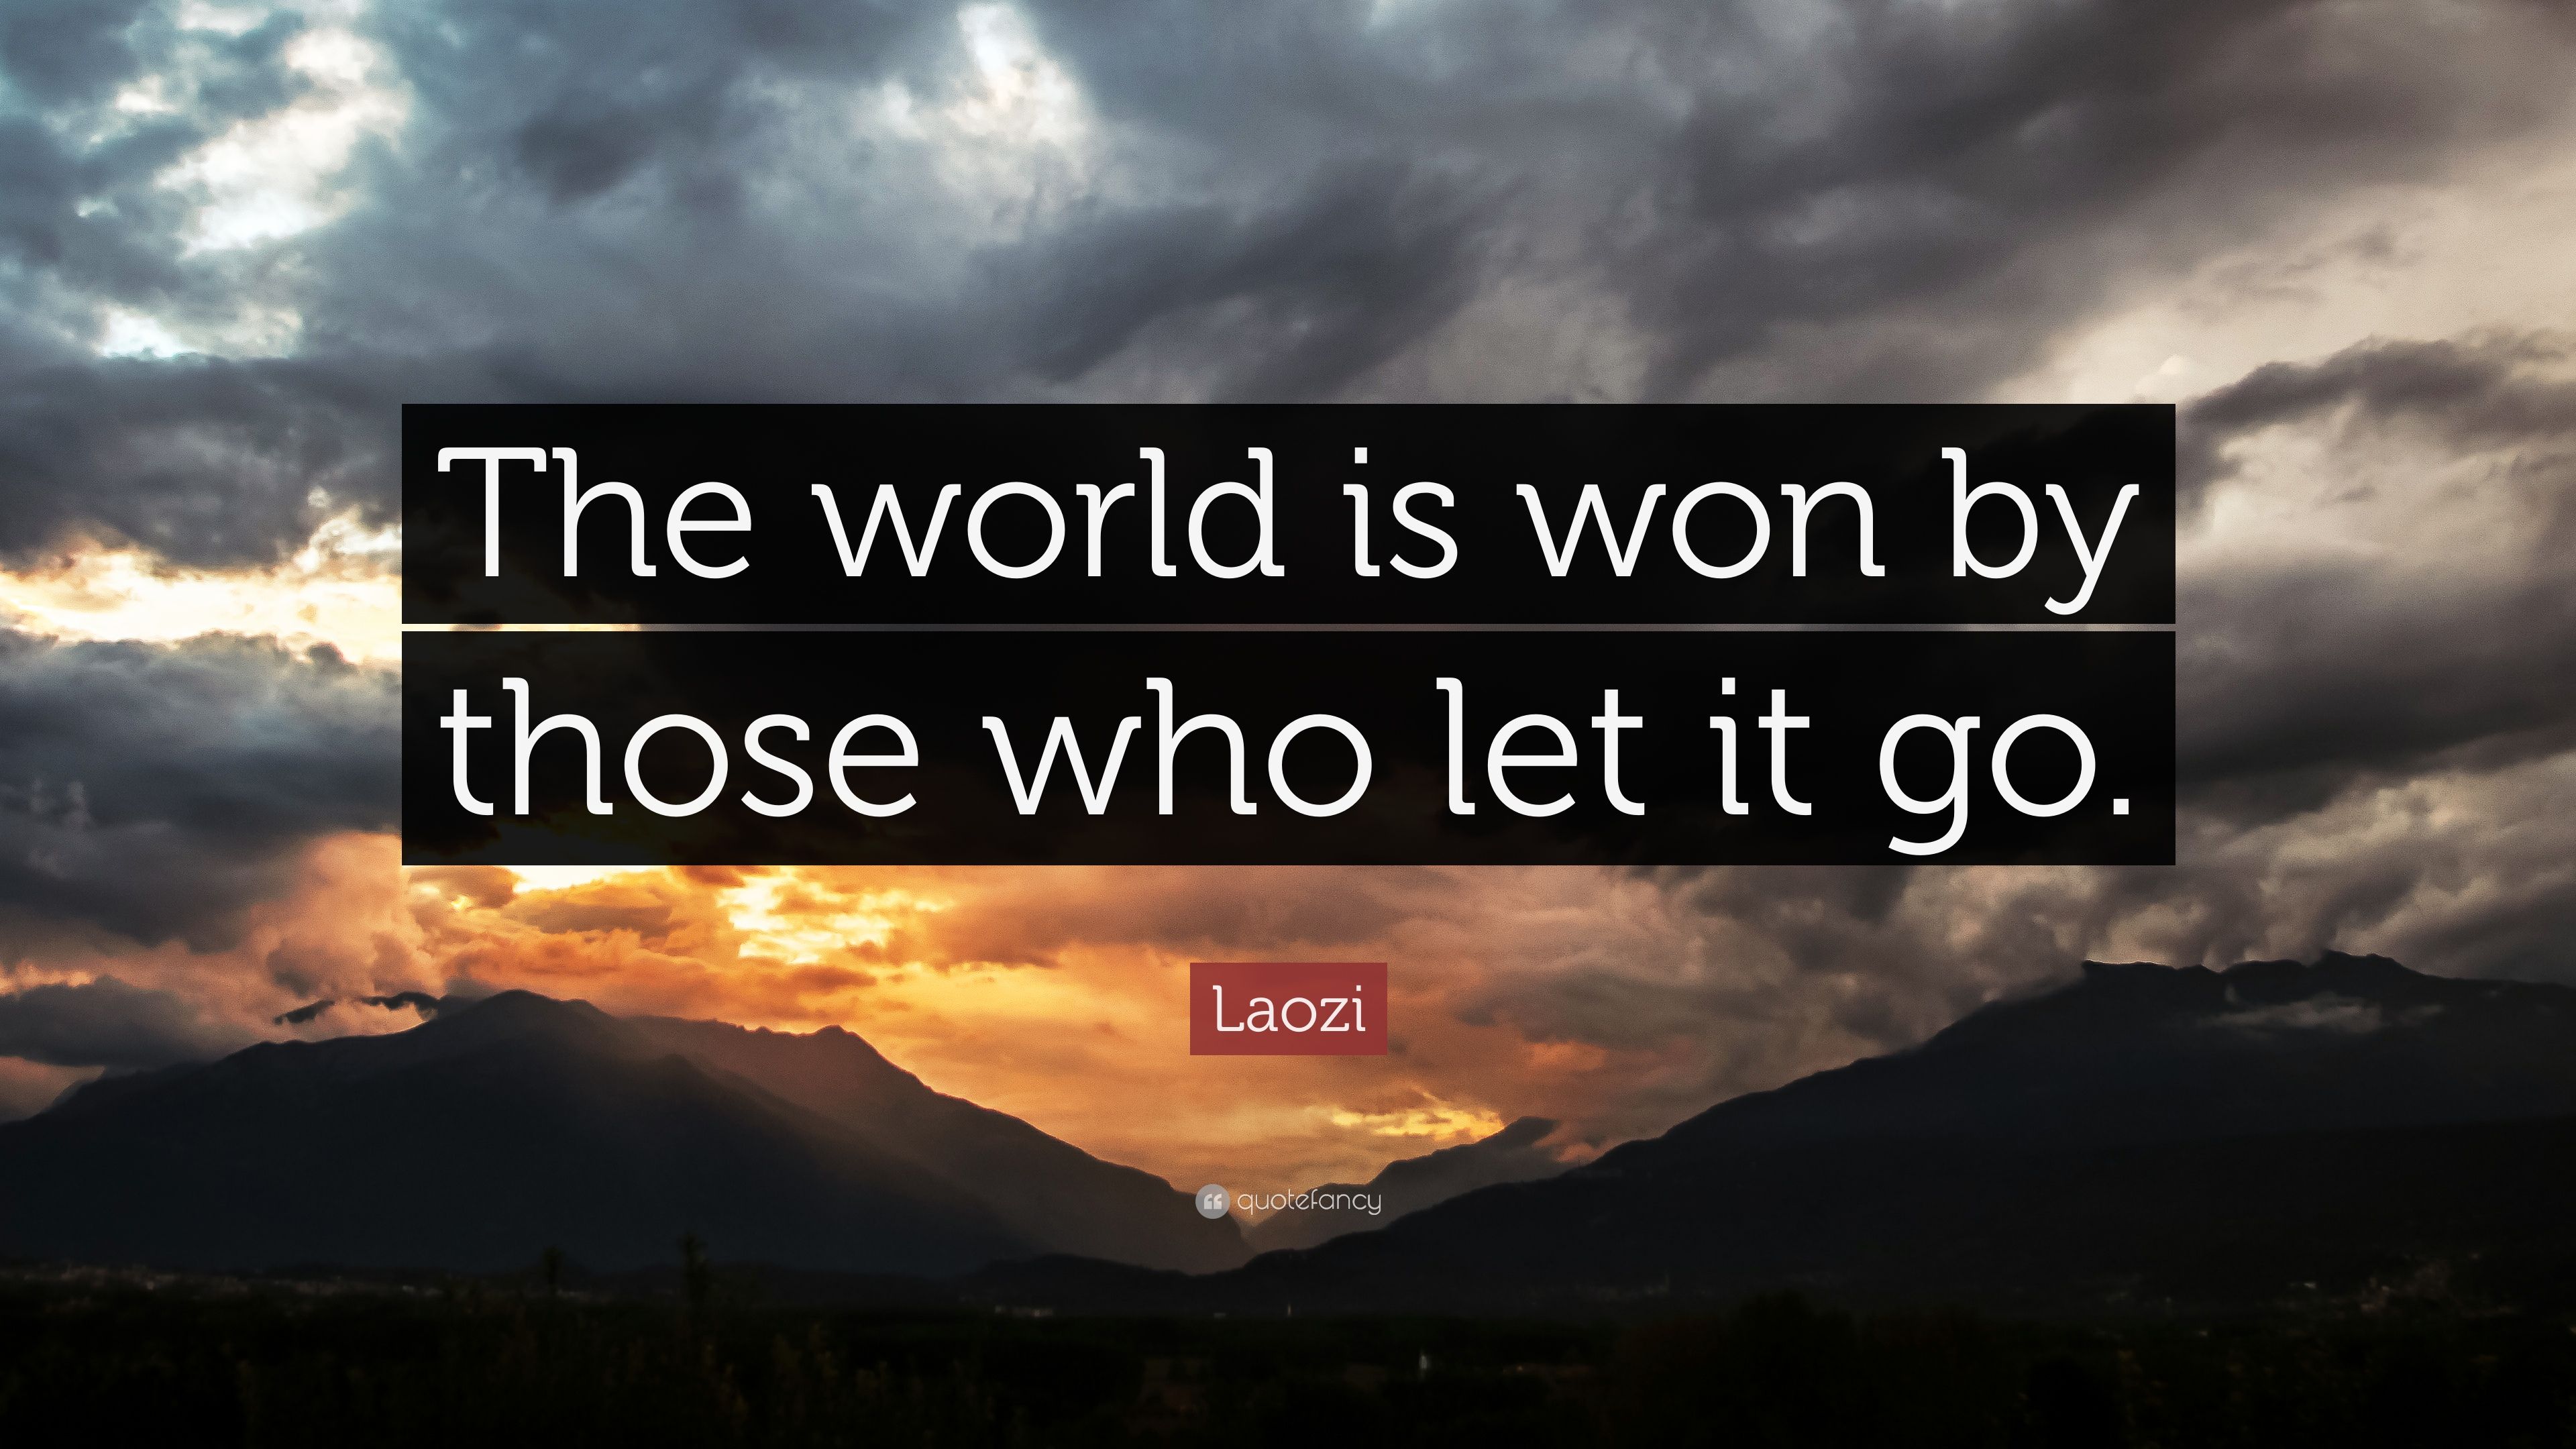 Laozi Quote: “The world is won by those who let it go.” (7 wallpaper)